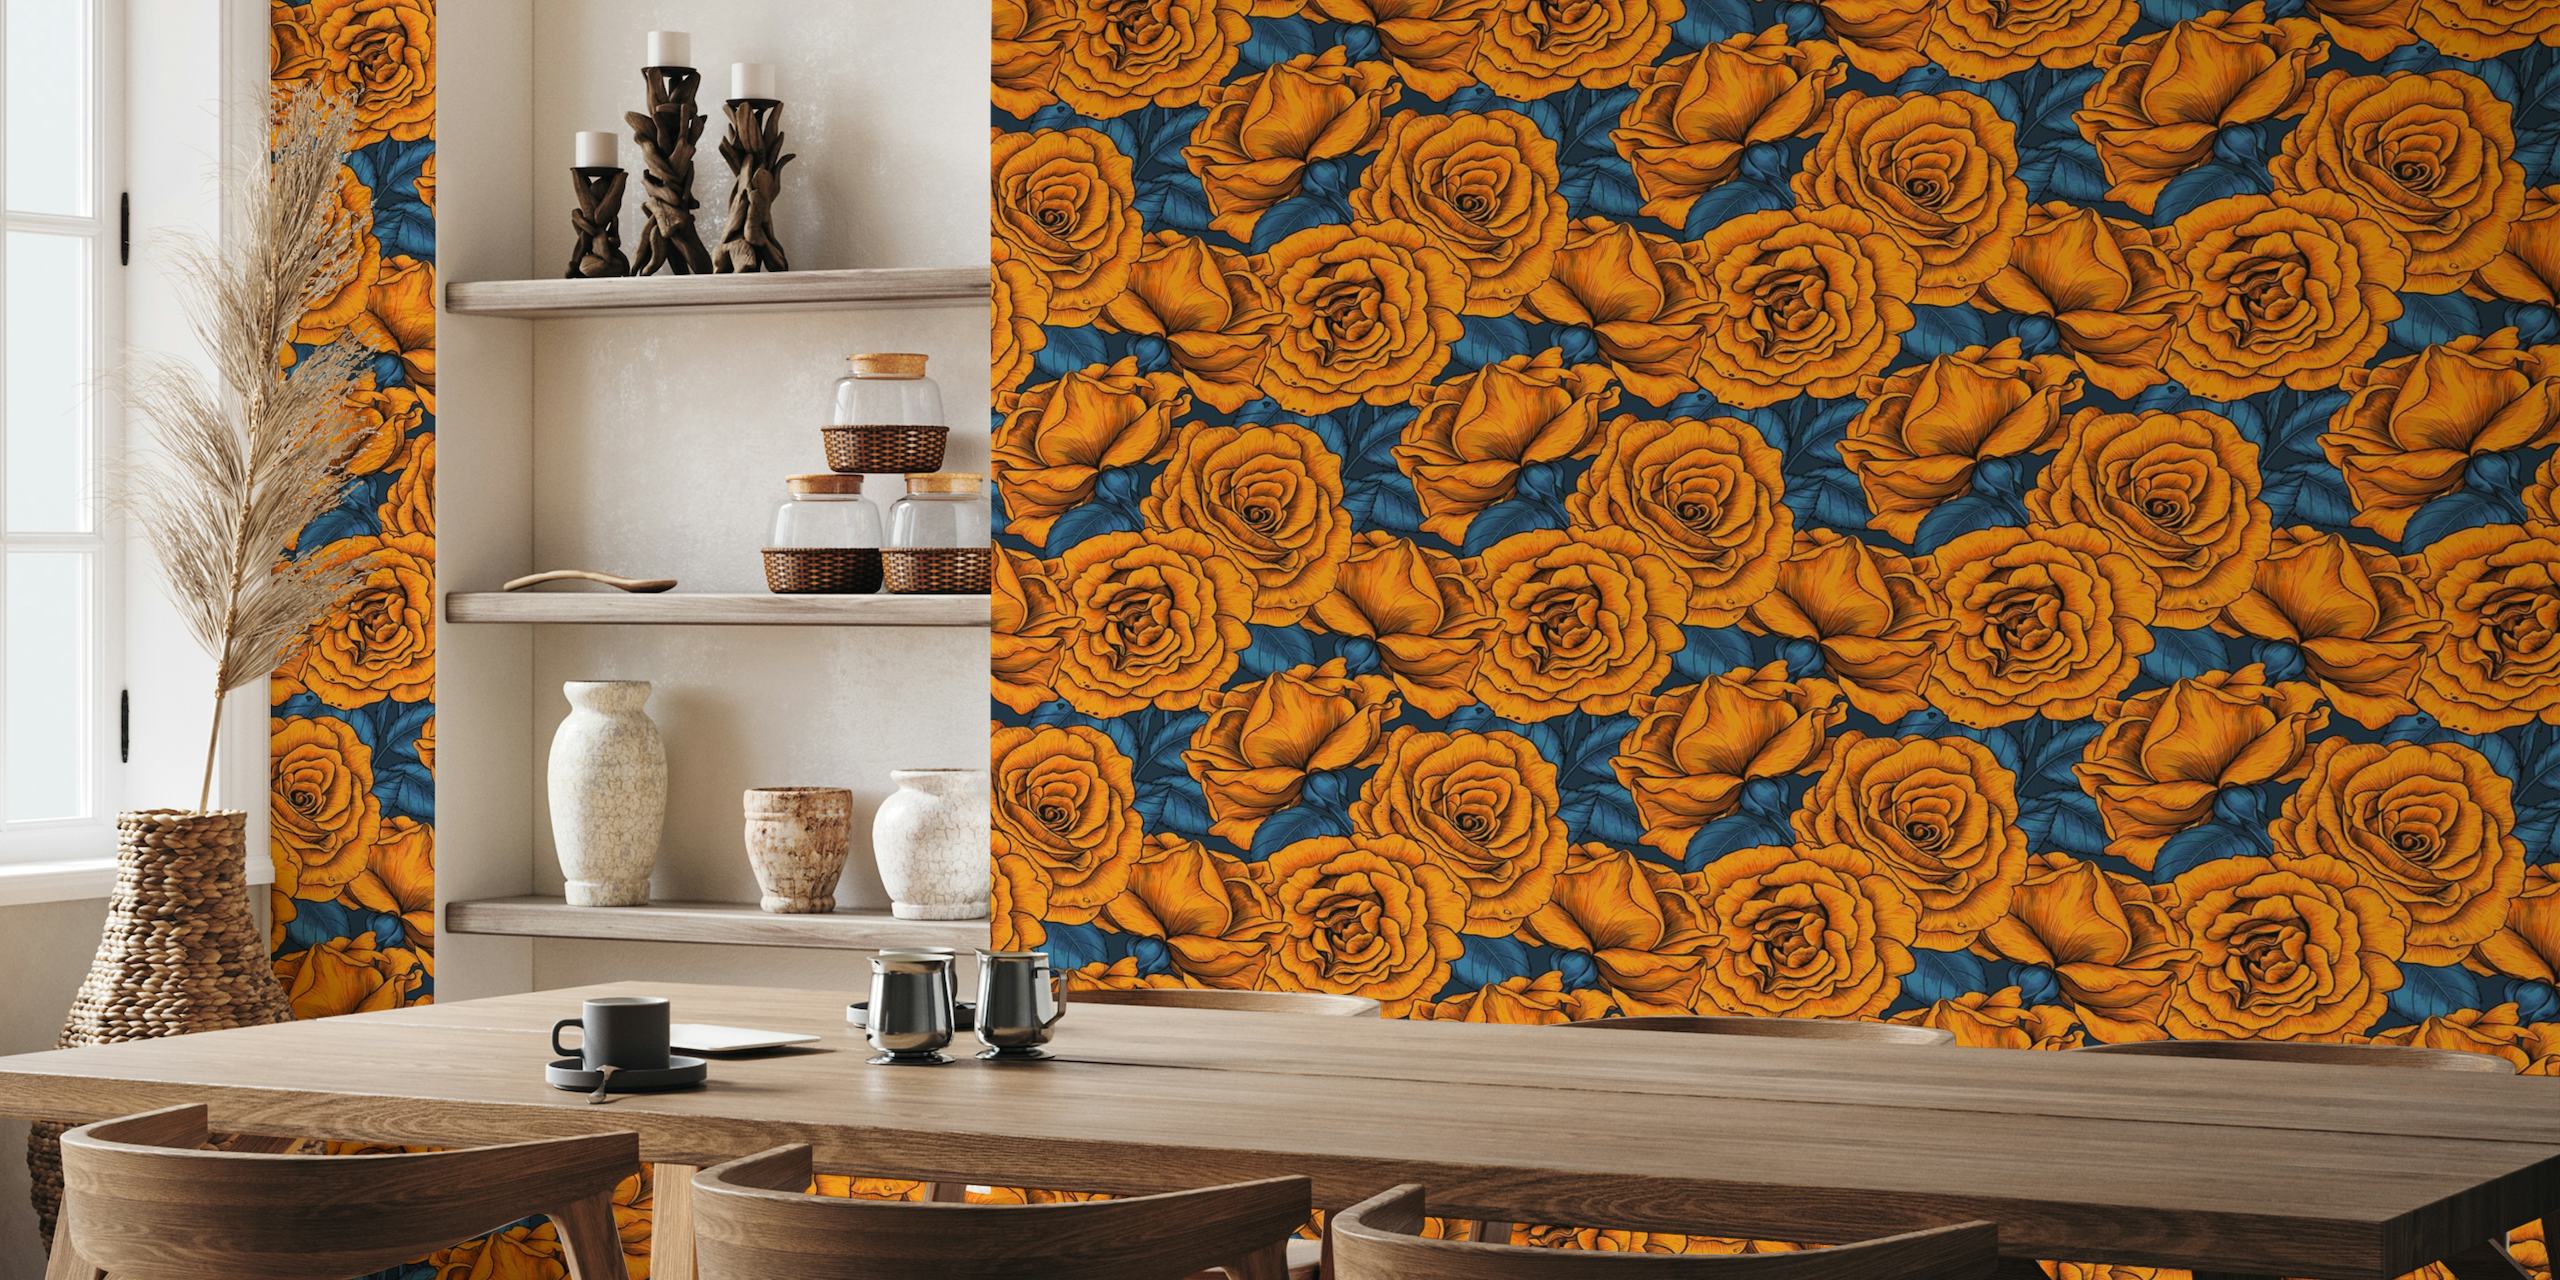 Orange roses with blue leaves wallpaper